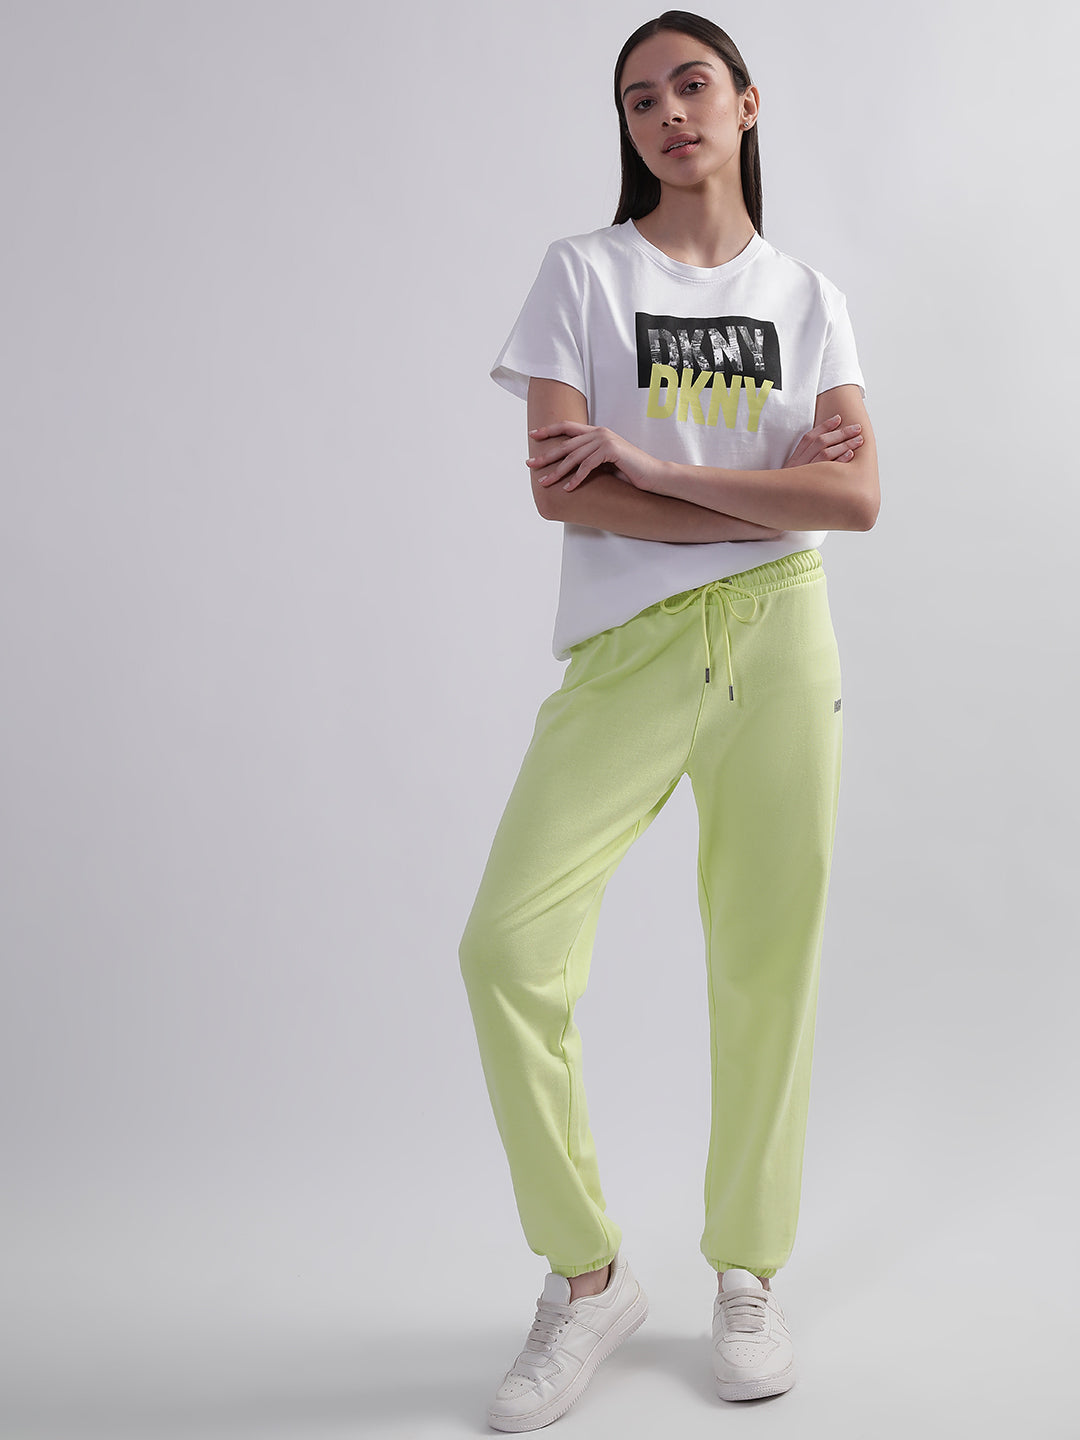 DKNY Women Lime Solid Regular Fit Sweatpant